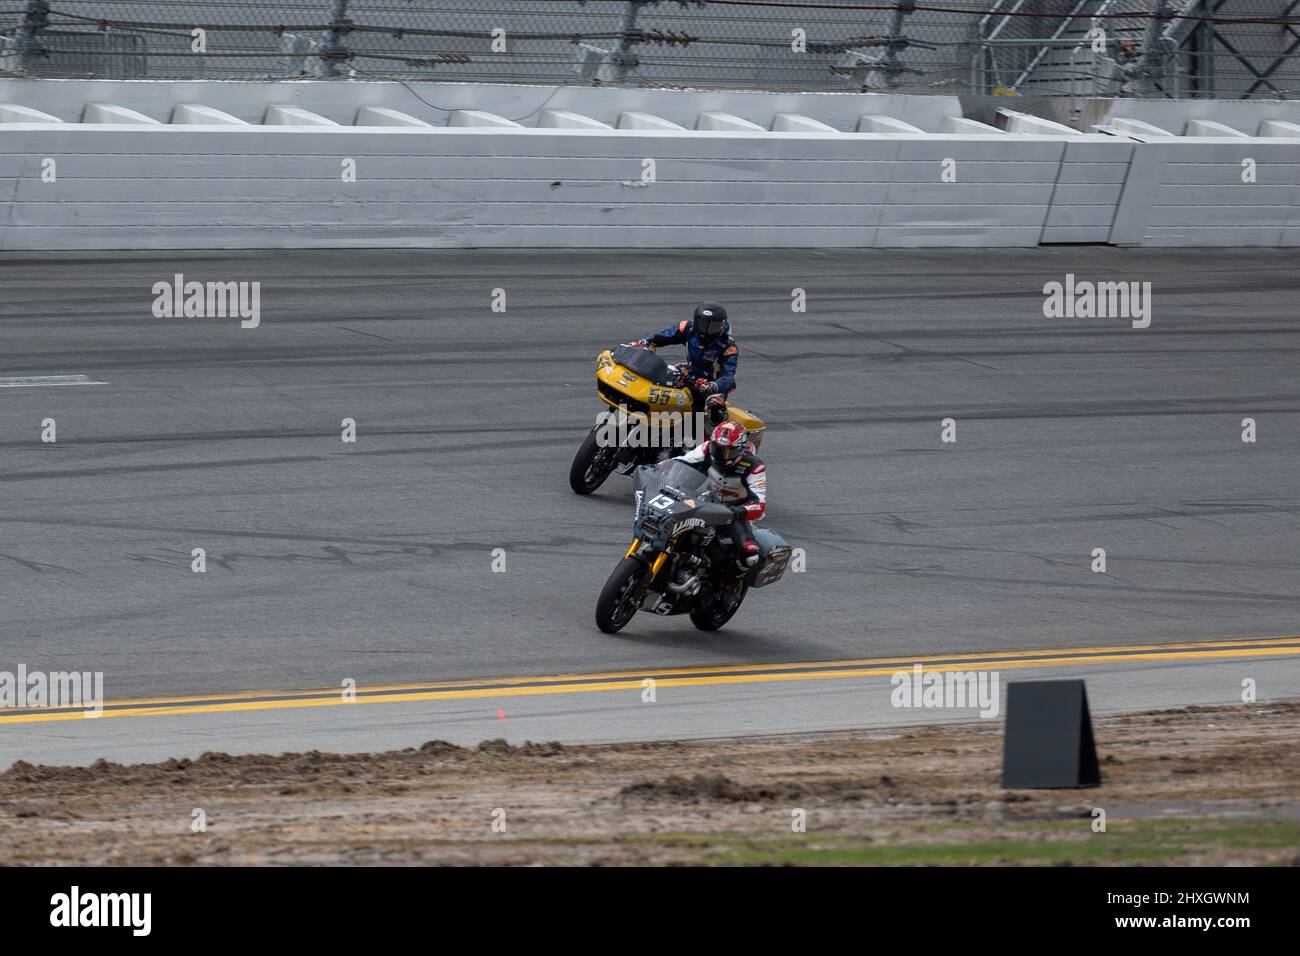 Daytona Beach, FL, USA. 12th March 2022. 13 Cory West, 55 Eric Stahl goes through the track during the Mission King of the Baggers at Daytona International Speedway in Daytona Beach, FL. 2022, MotoAmerica, home of AMA Superbike and North America's premier motorcycle road racing series. Credit: Yaroslav Sabitov/Yes Market Media/Alamy Live News Stock Photo